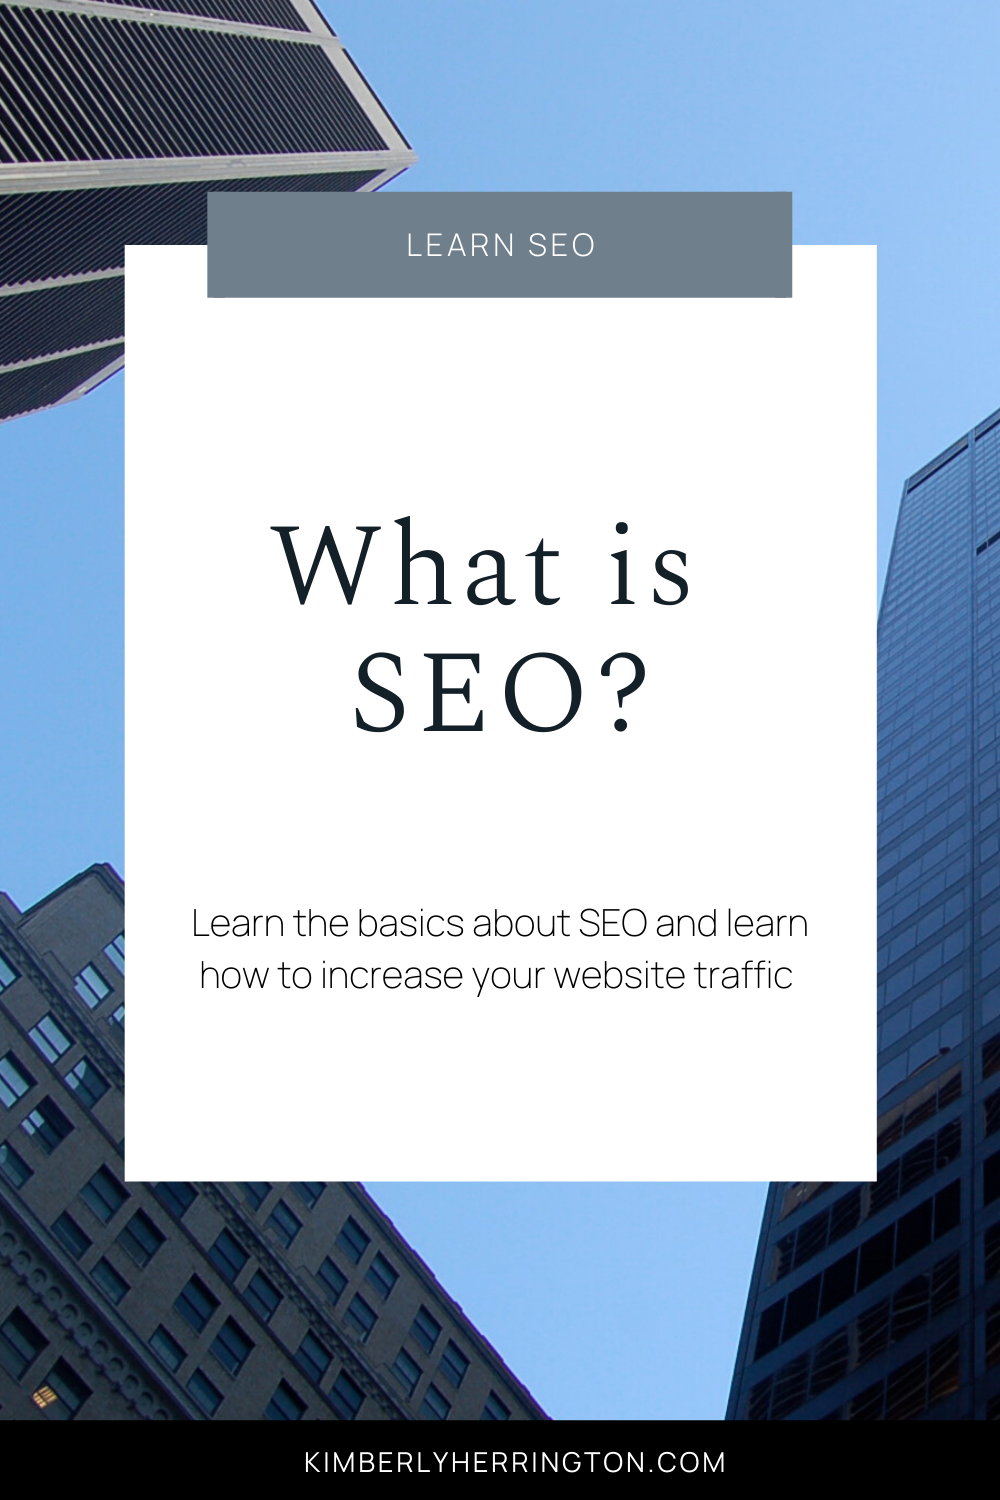 What is SEO and how to do SEO